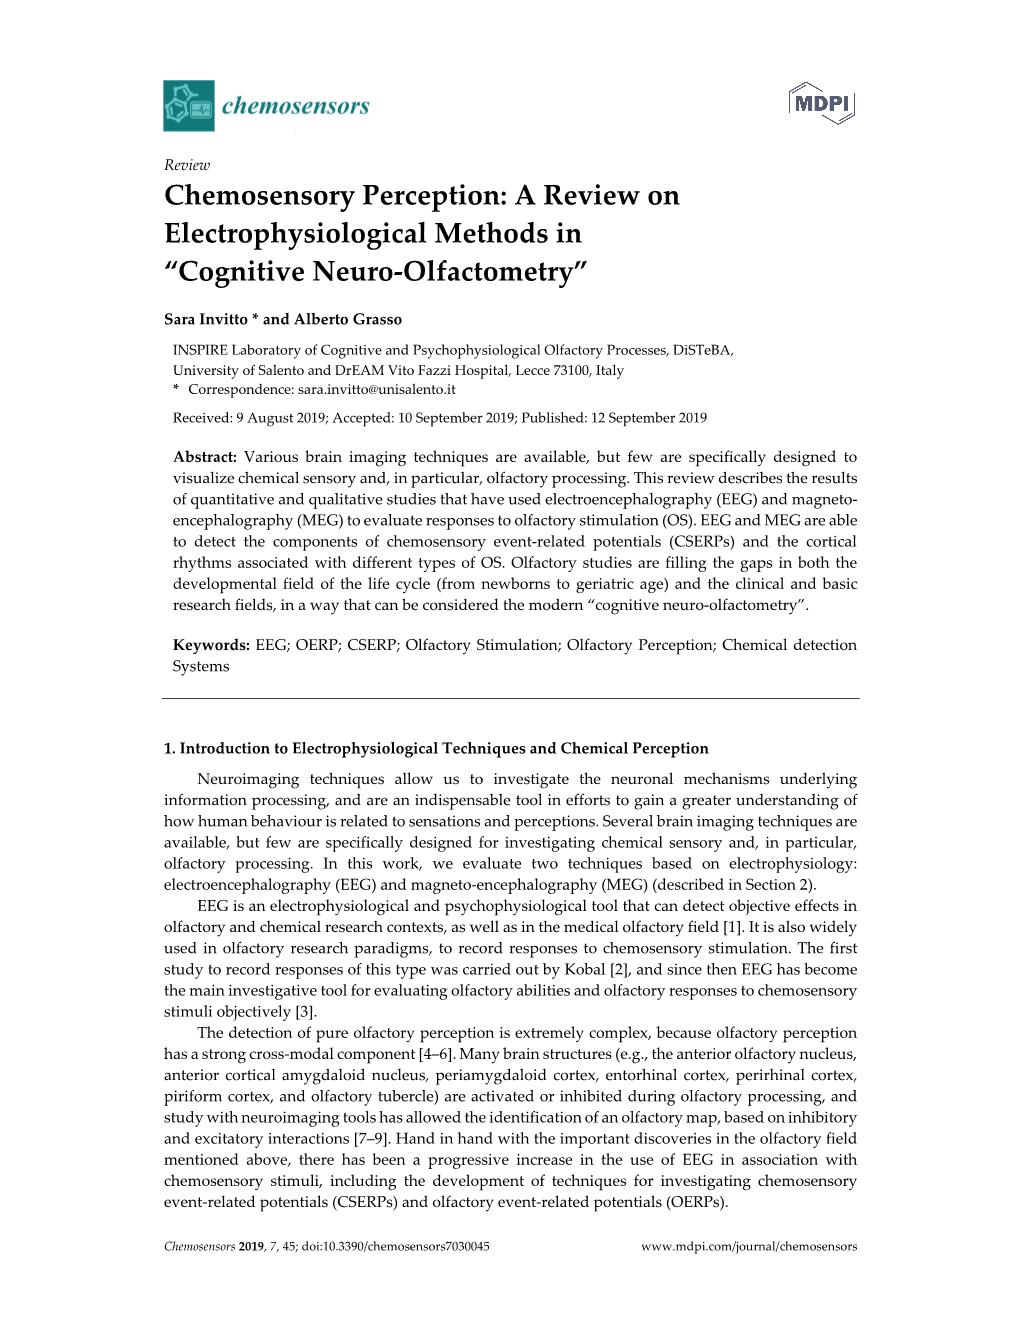 Chemosensory Perception: a Review on Electrophysiological Methods in “Cognitive Neuro-Olfactometry”